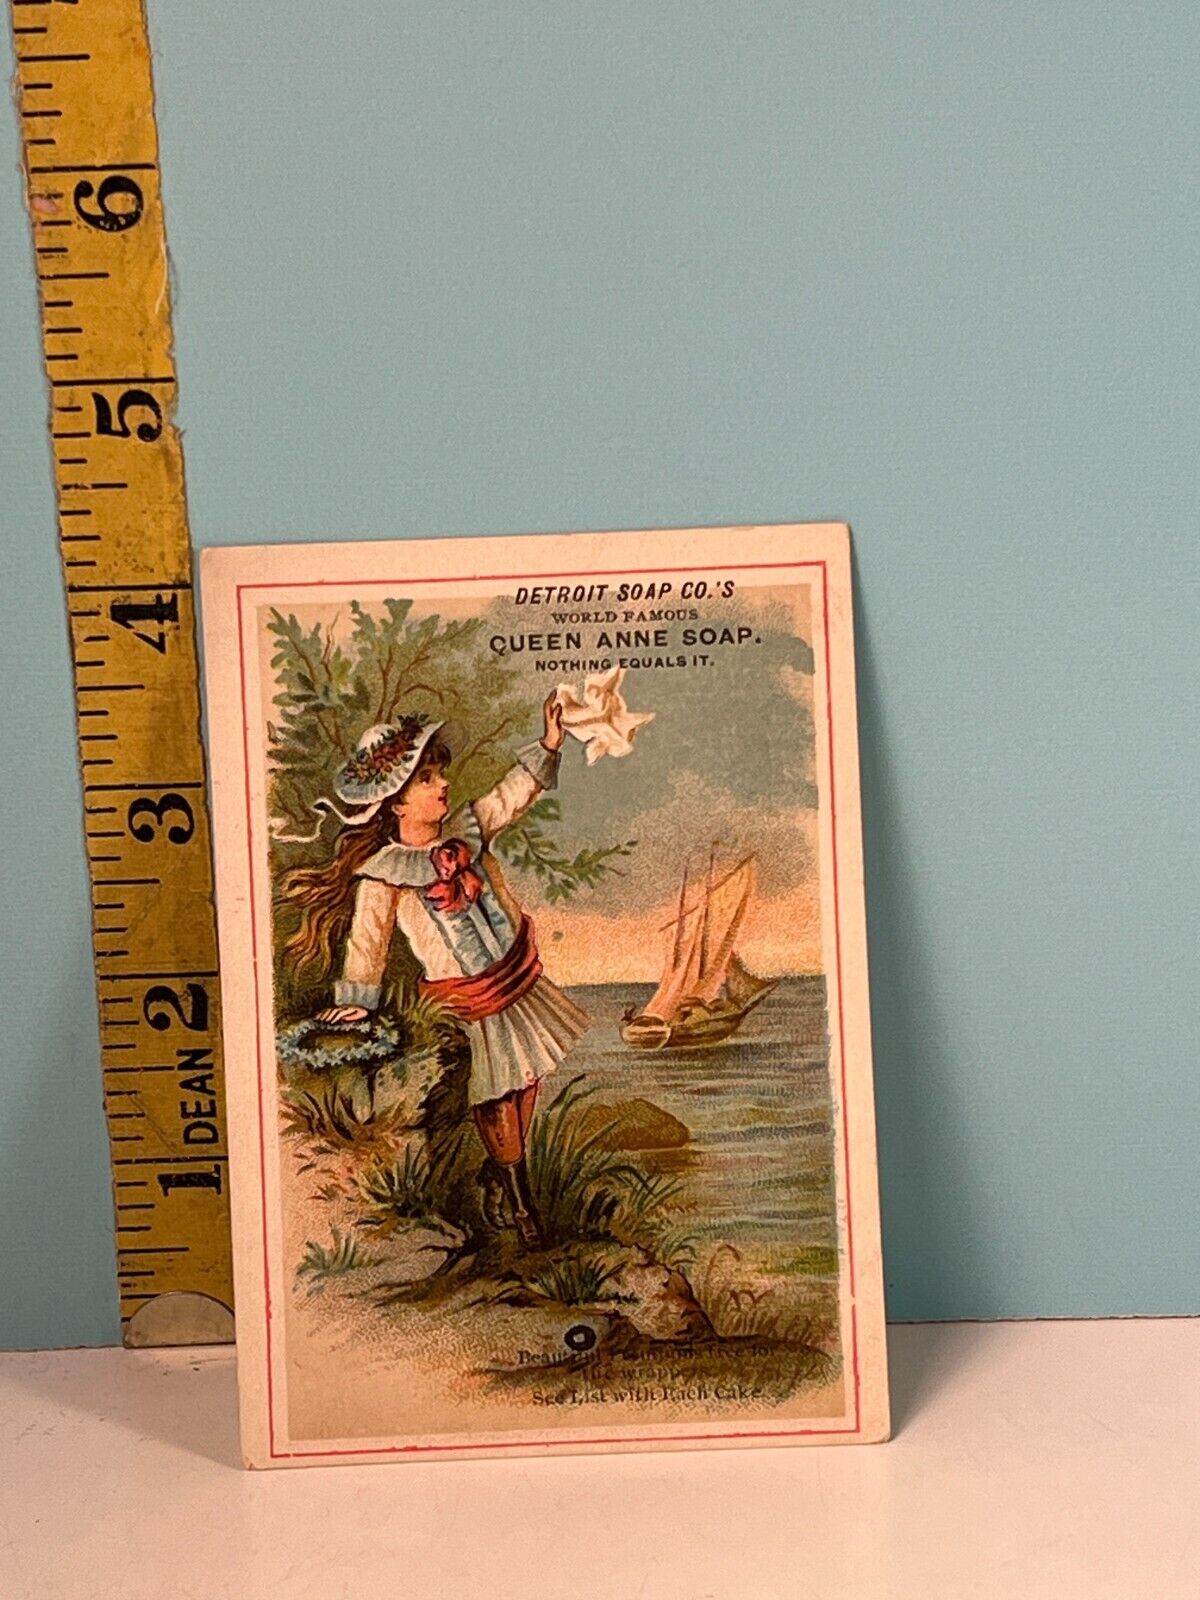 1800's Queen Anne Soap, No. 183qty 4 sea series  by Detroit Soap Co trade card .